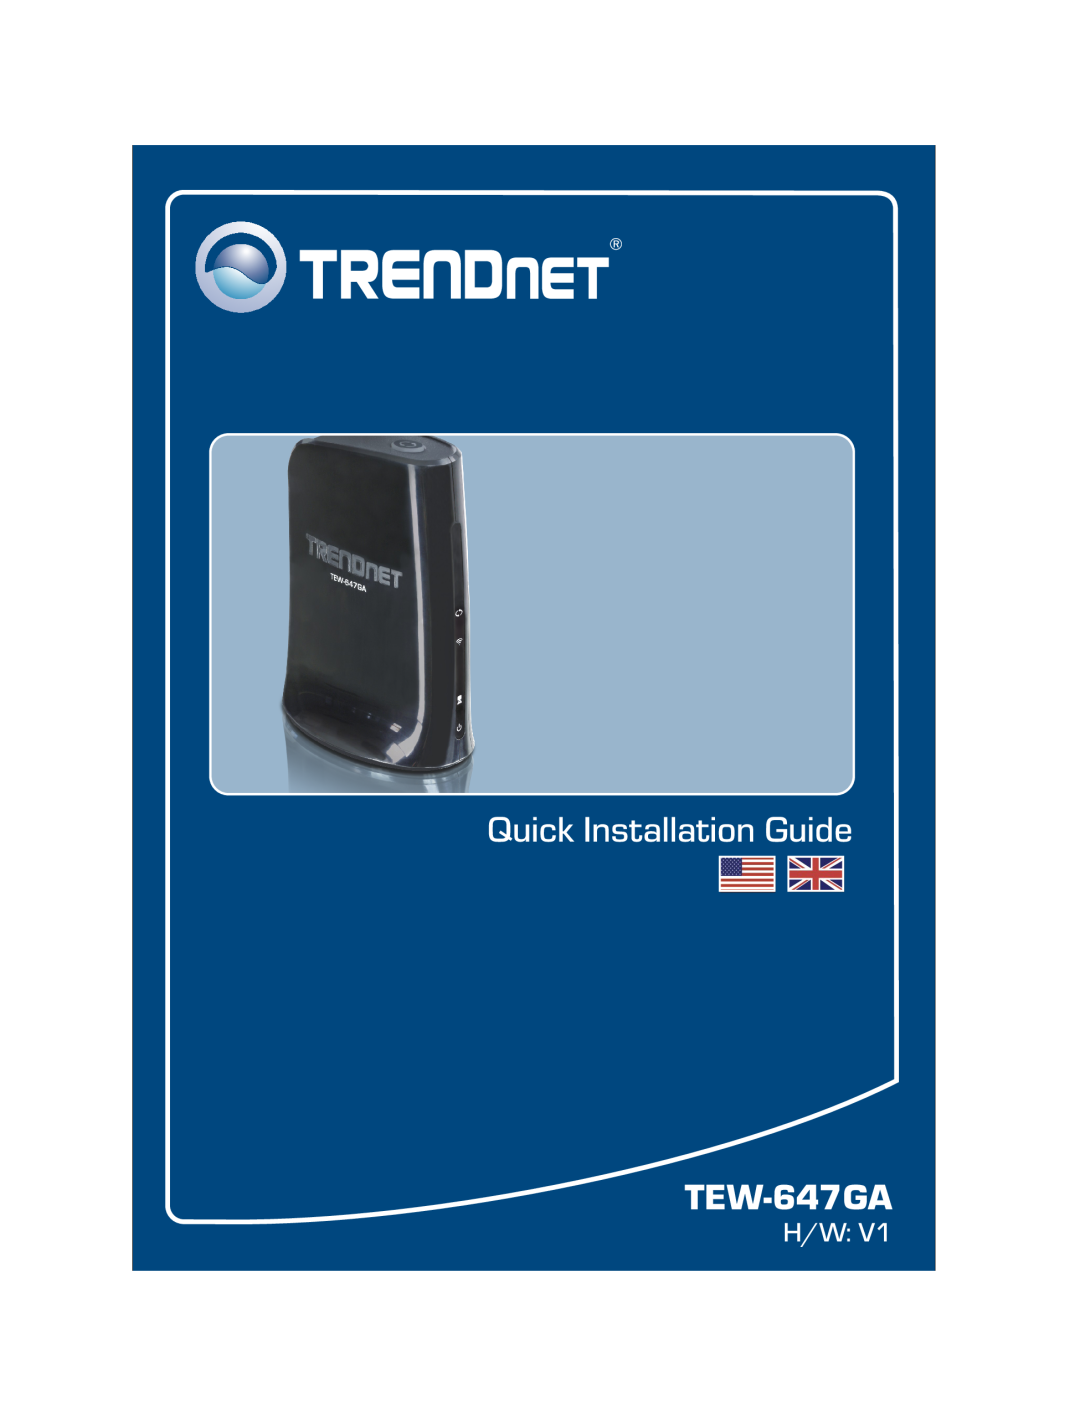 TRENDnet 300Mbps Wireless N Gigabit Router manual Quick Installation Guide, TEW-647GA 